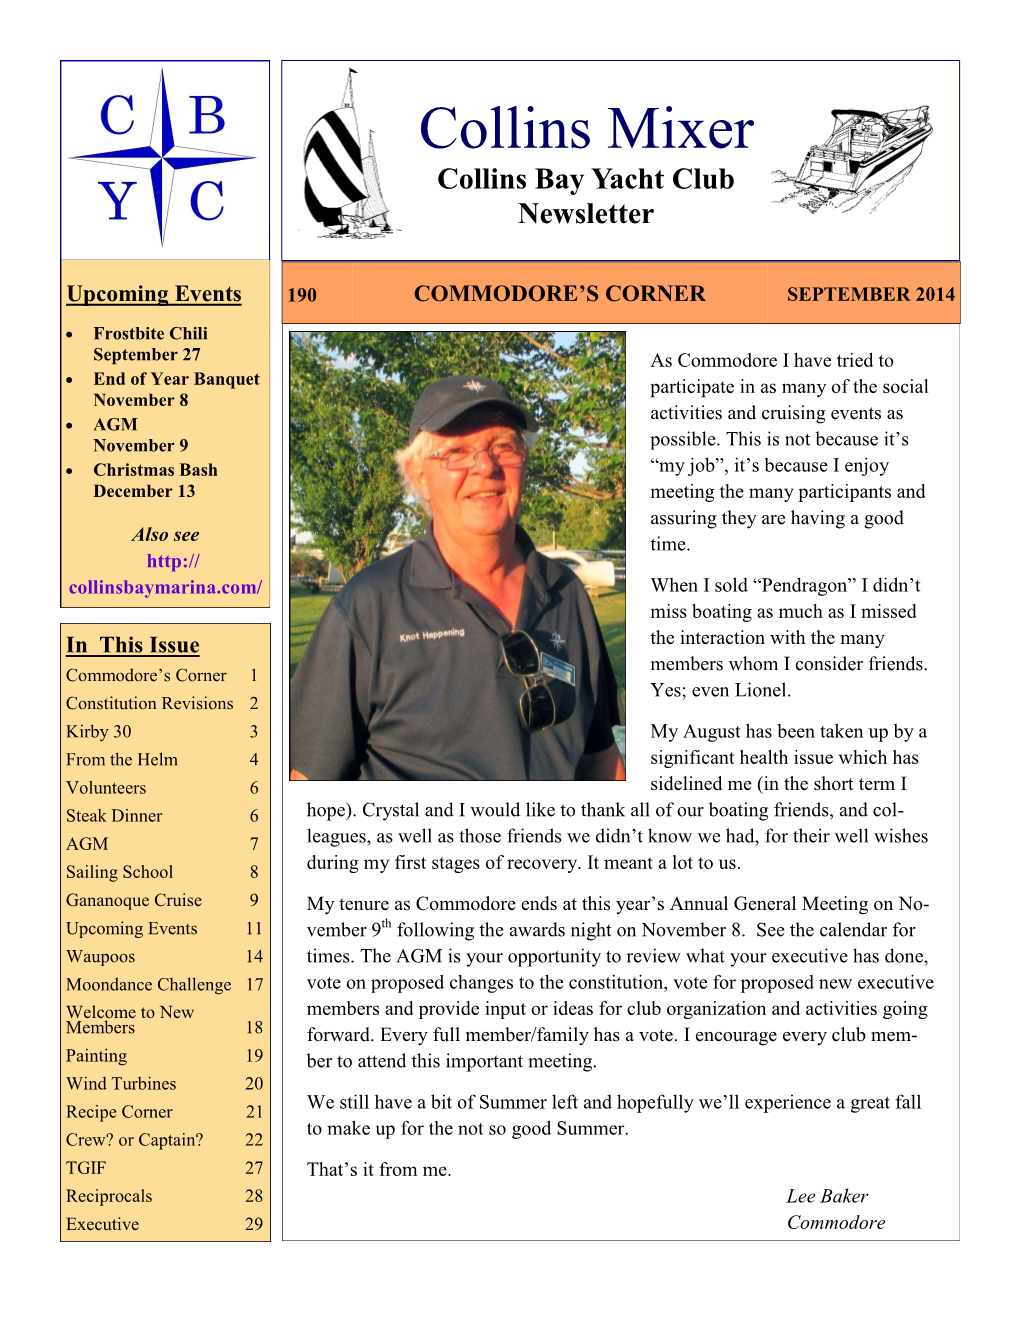 CBYC Mixer Is Published Seven Times a Year for CBYC Members and Friends, April Through No- Vember